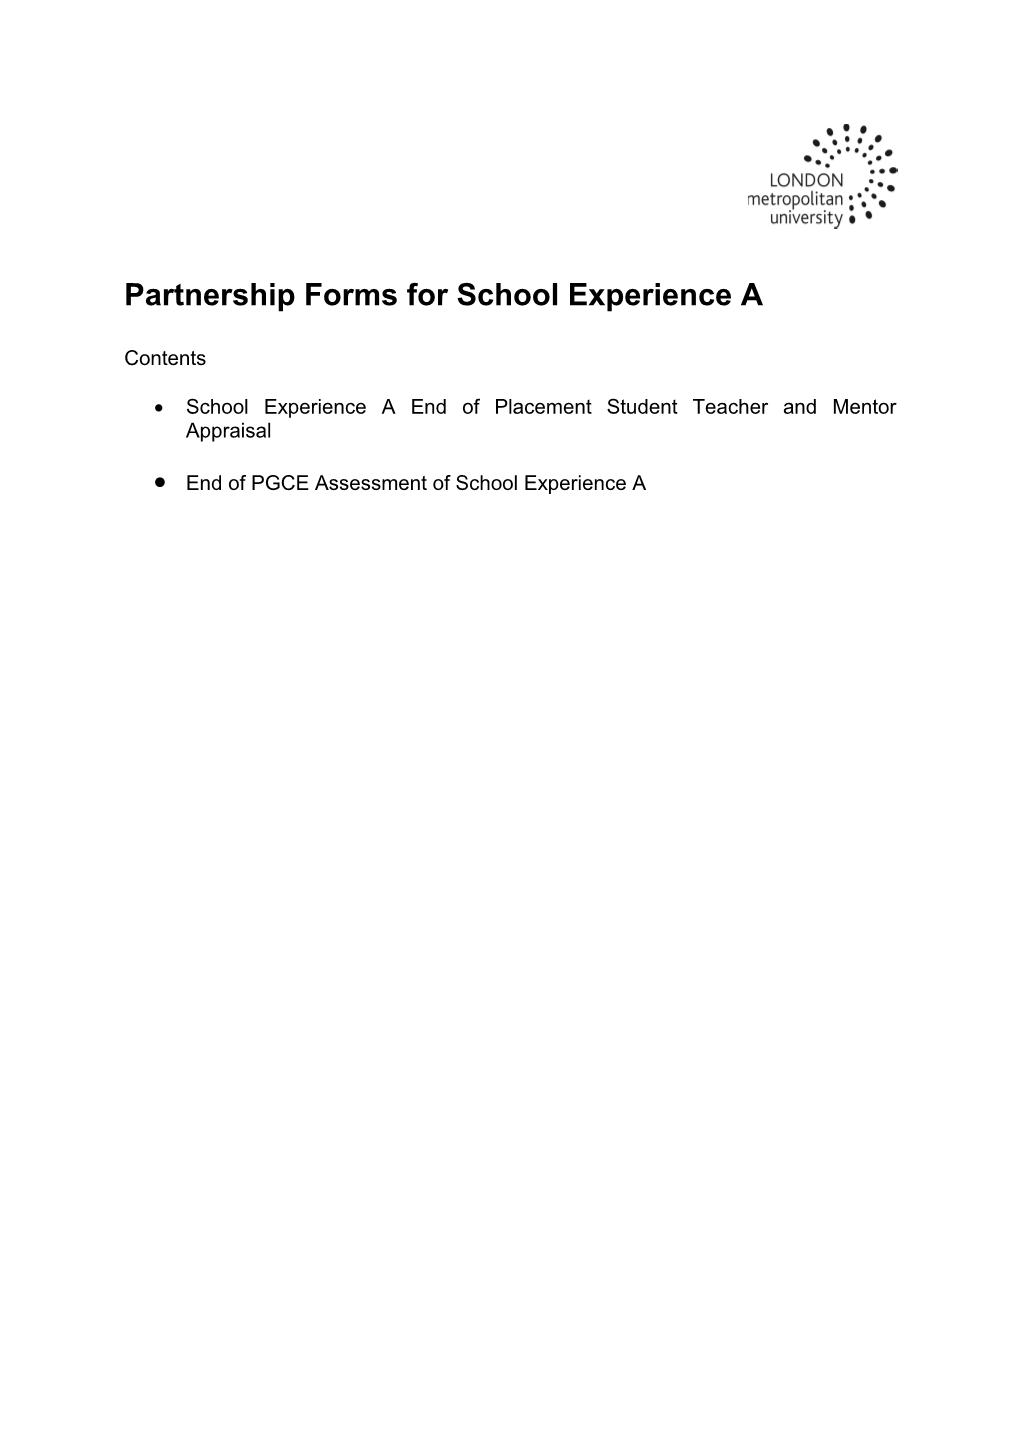 Partnership Forms for School Experience A